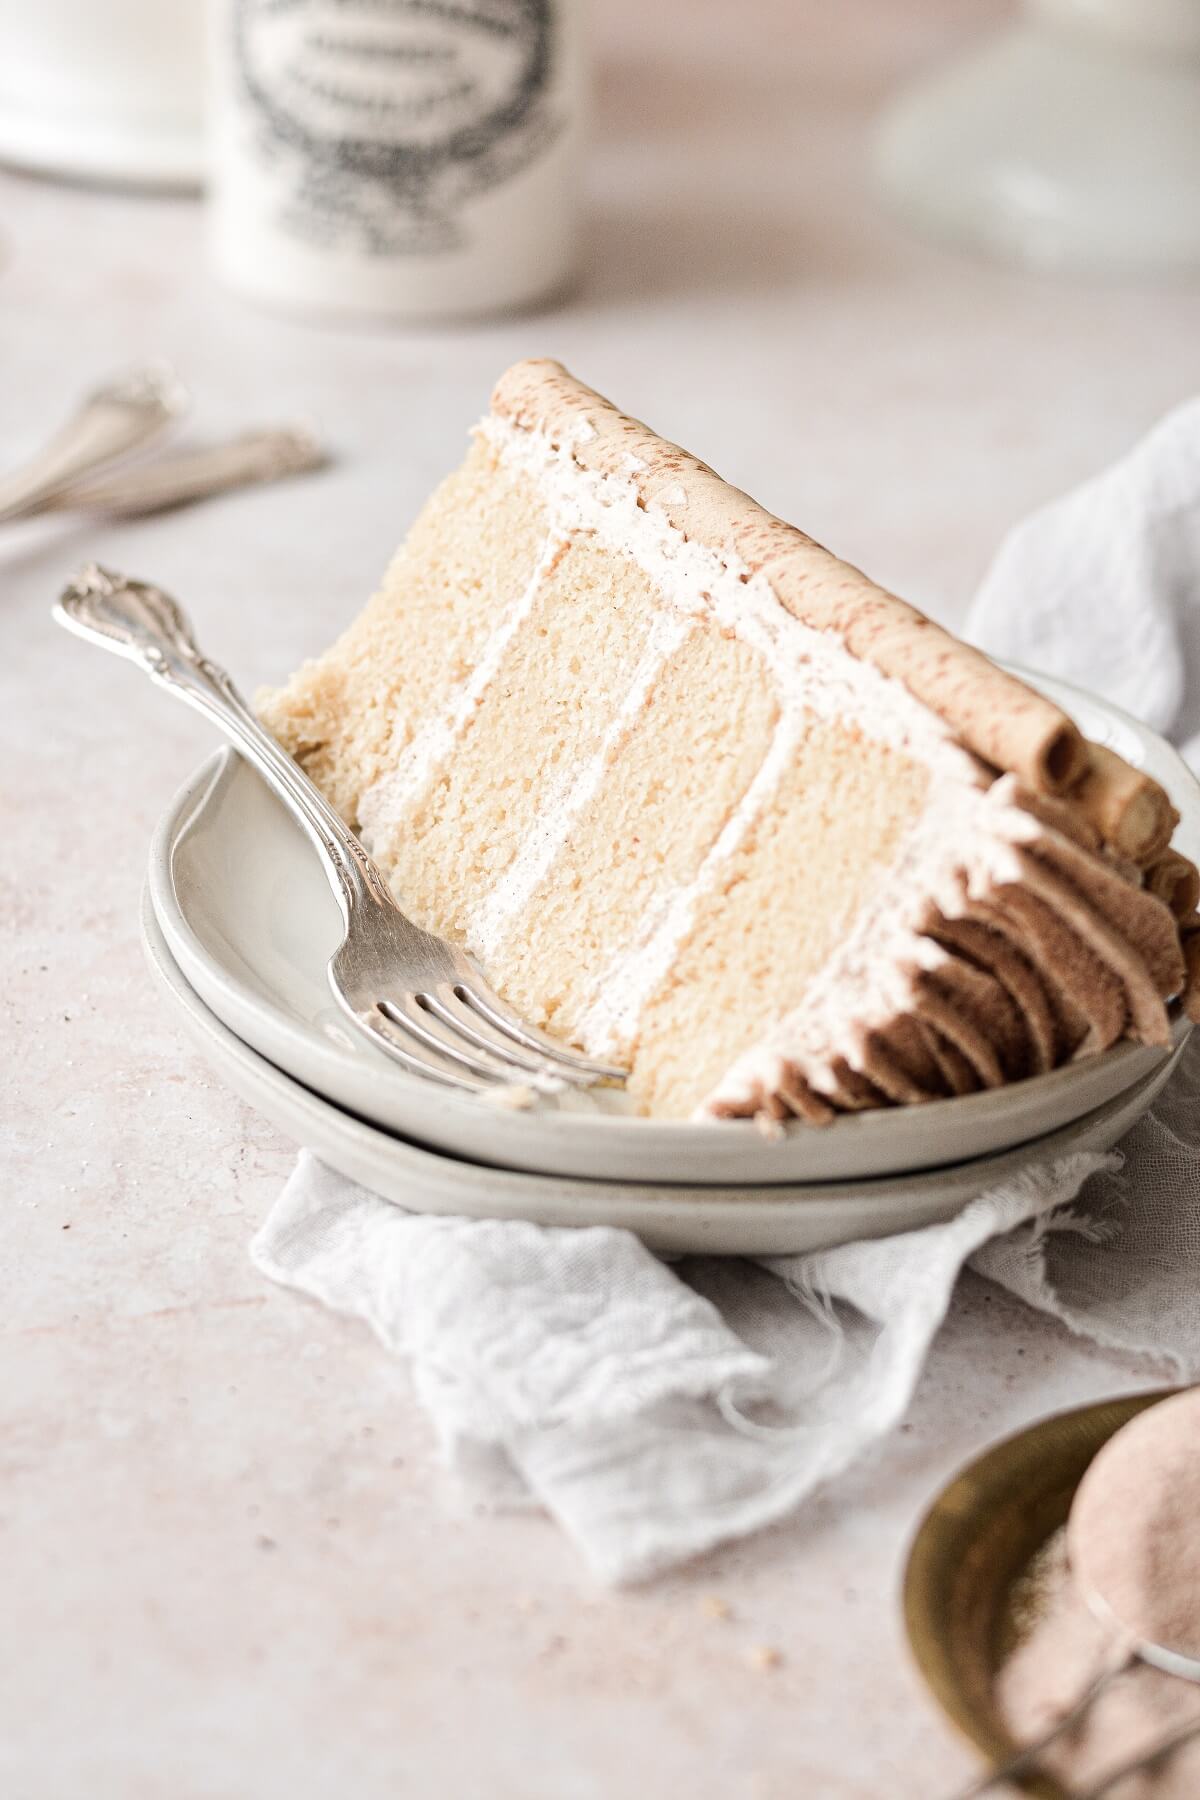 A slice of snickerdoodle cake with a vintage silver fork.